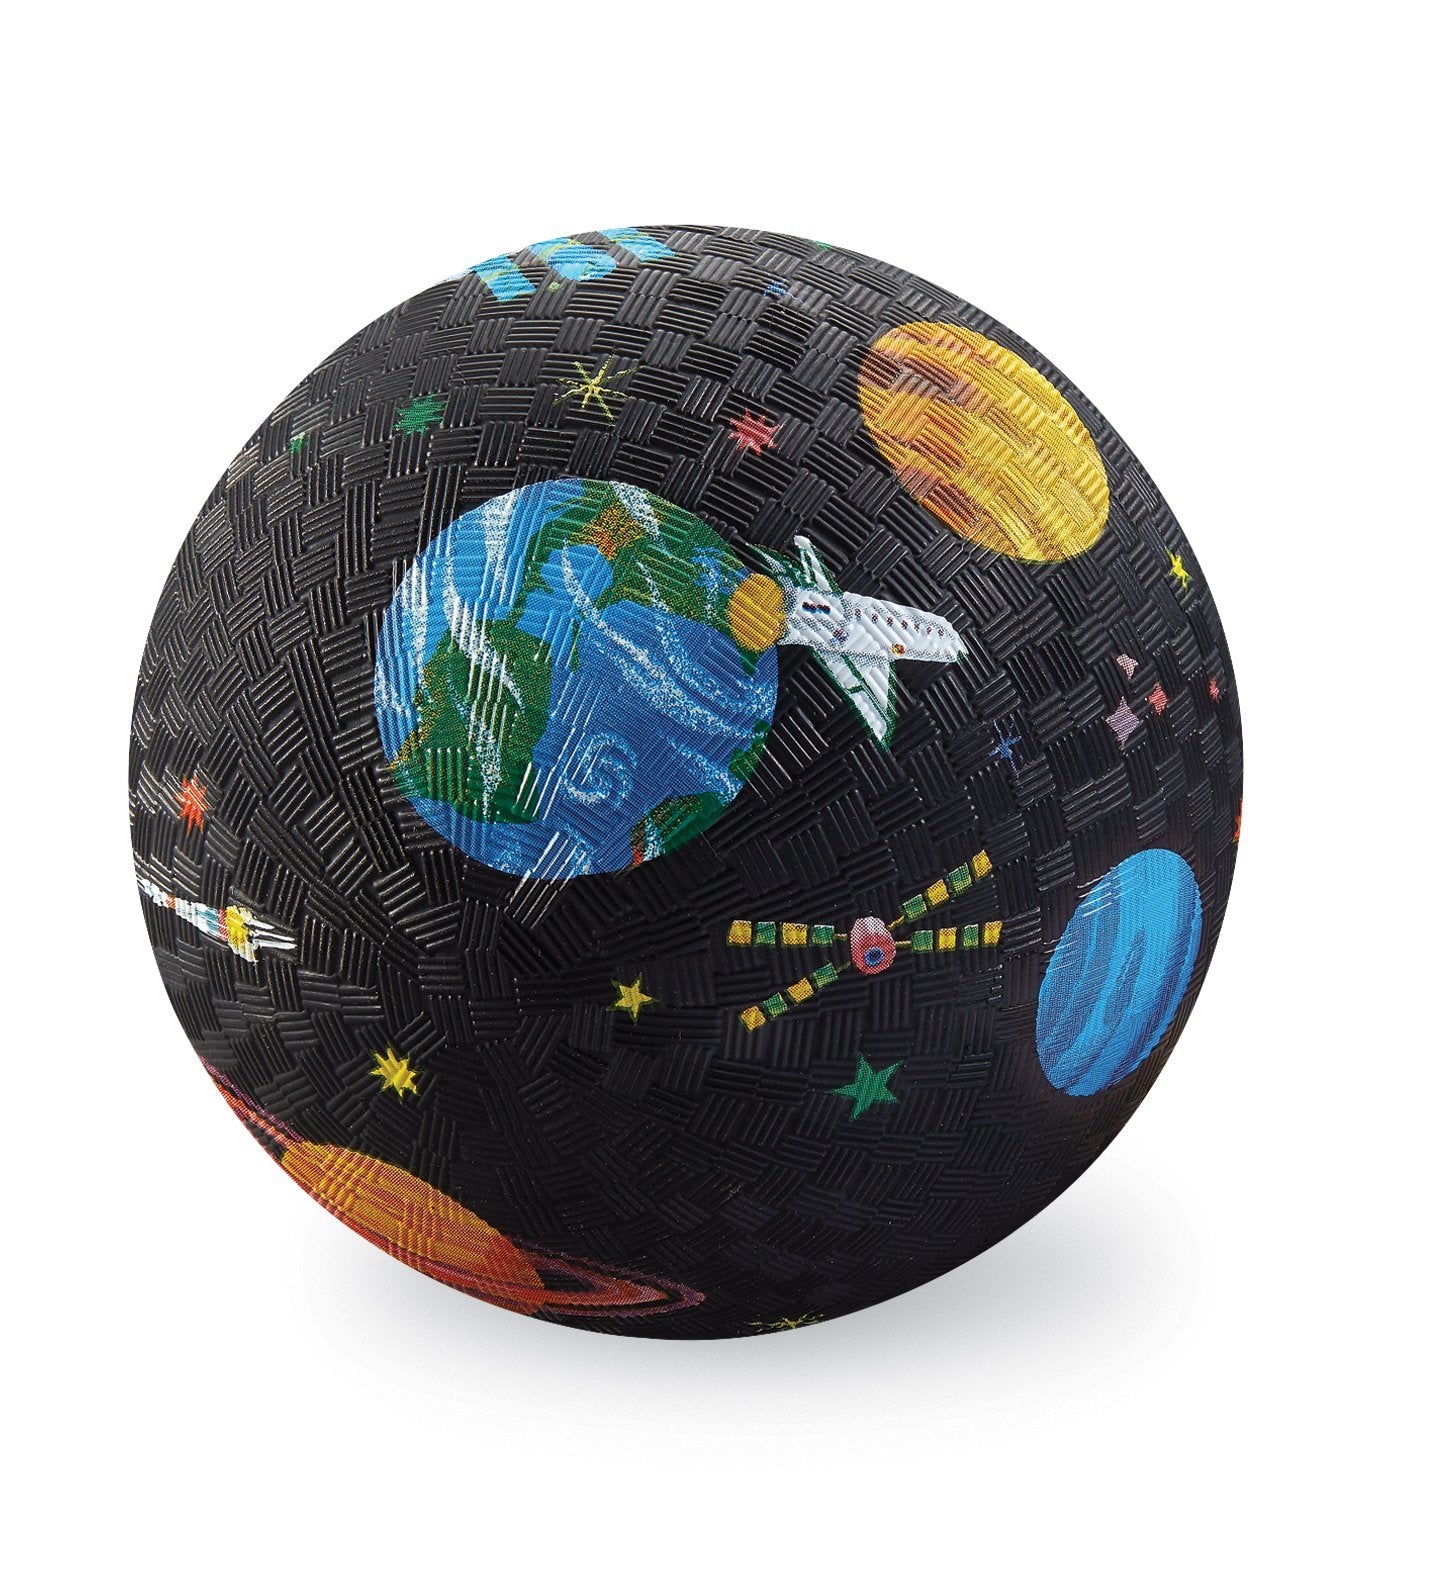 7 INCH PLAYGROUND BALL - SPACE EXPLORATION by CROCODILE CREEK - The Playful Collective